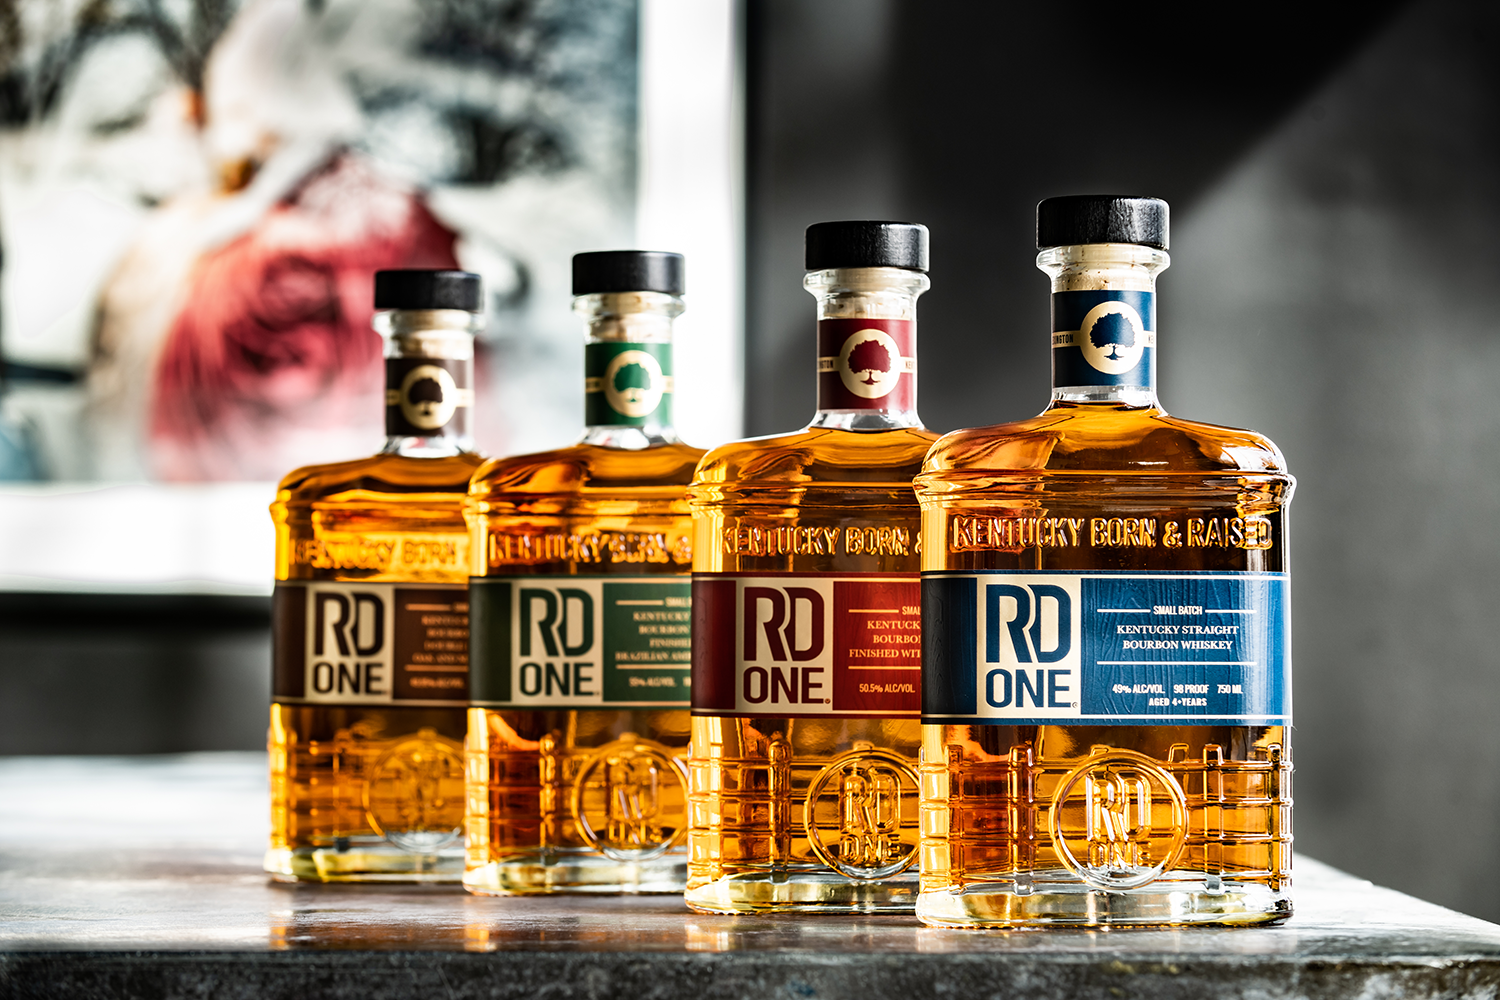 RD1 Spirits Celebrates Year of New Bourbons, Awards, and Distribution